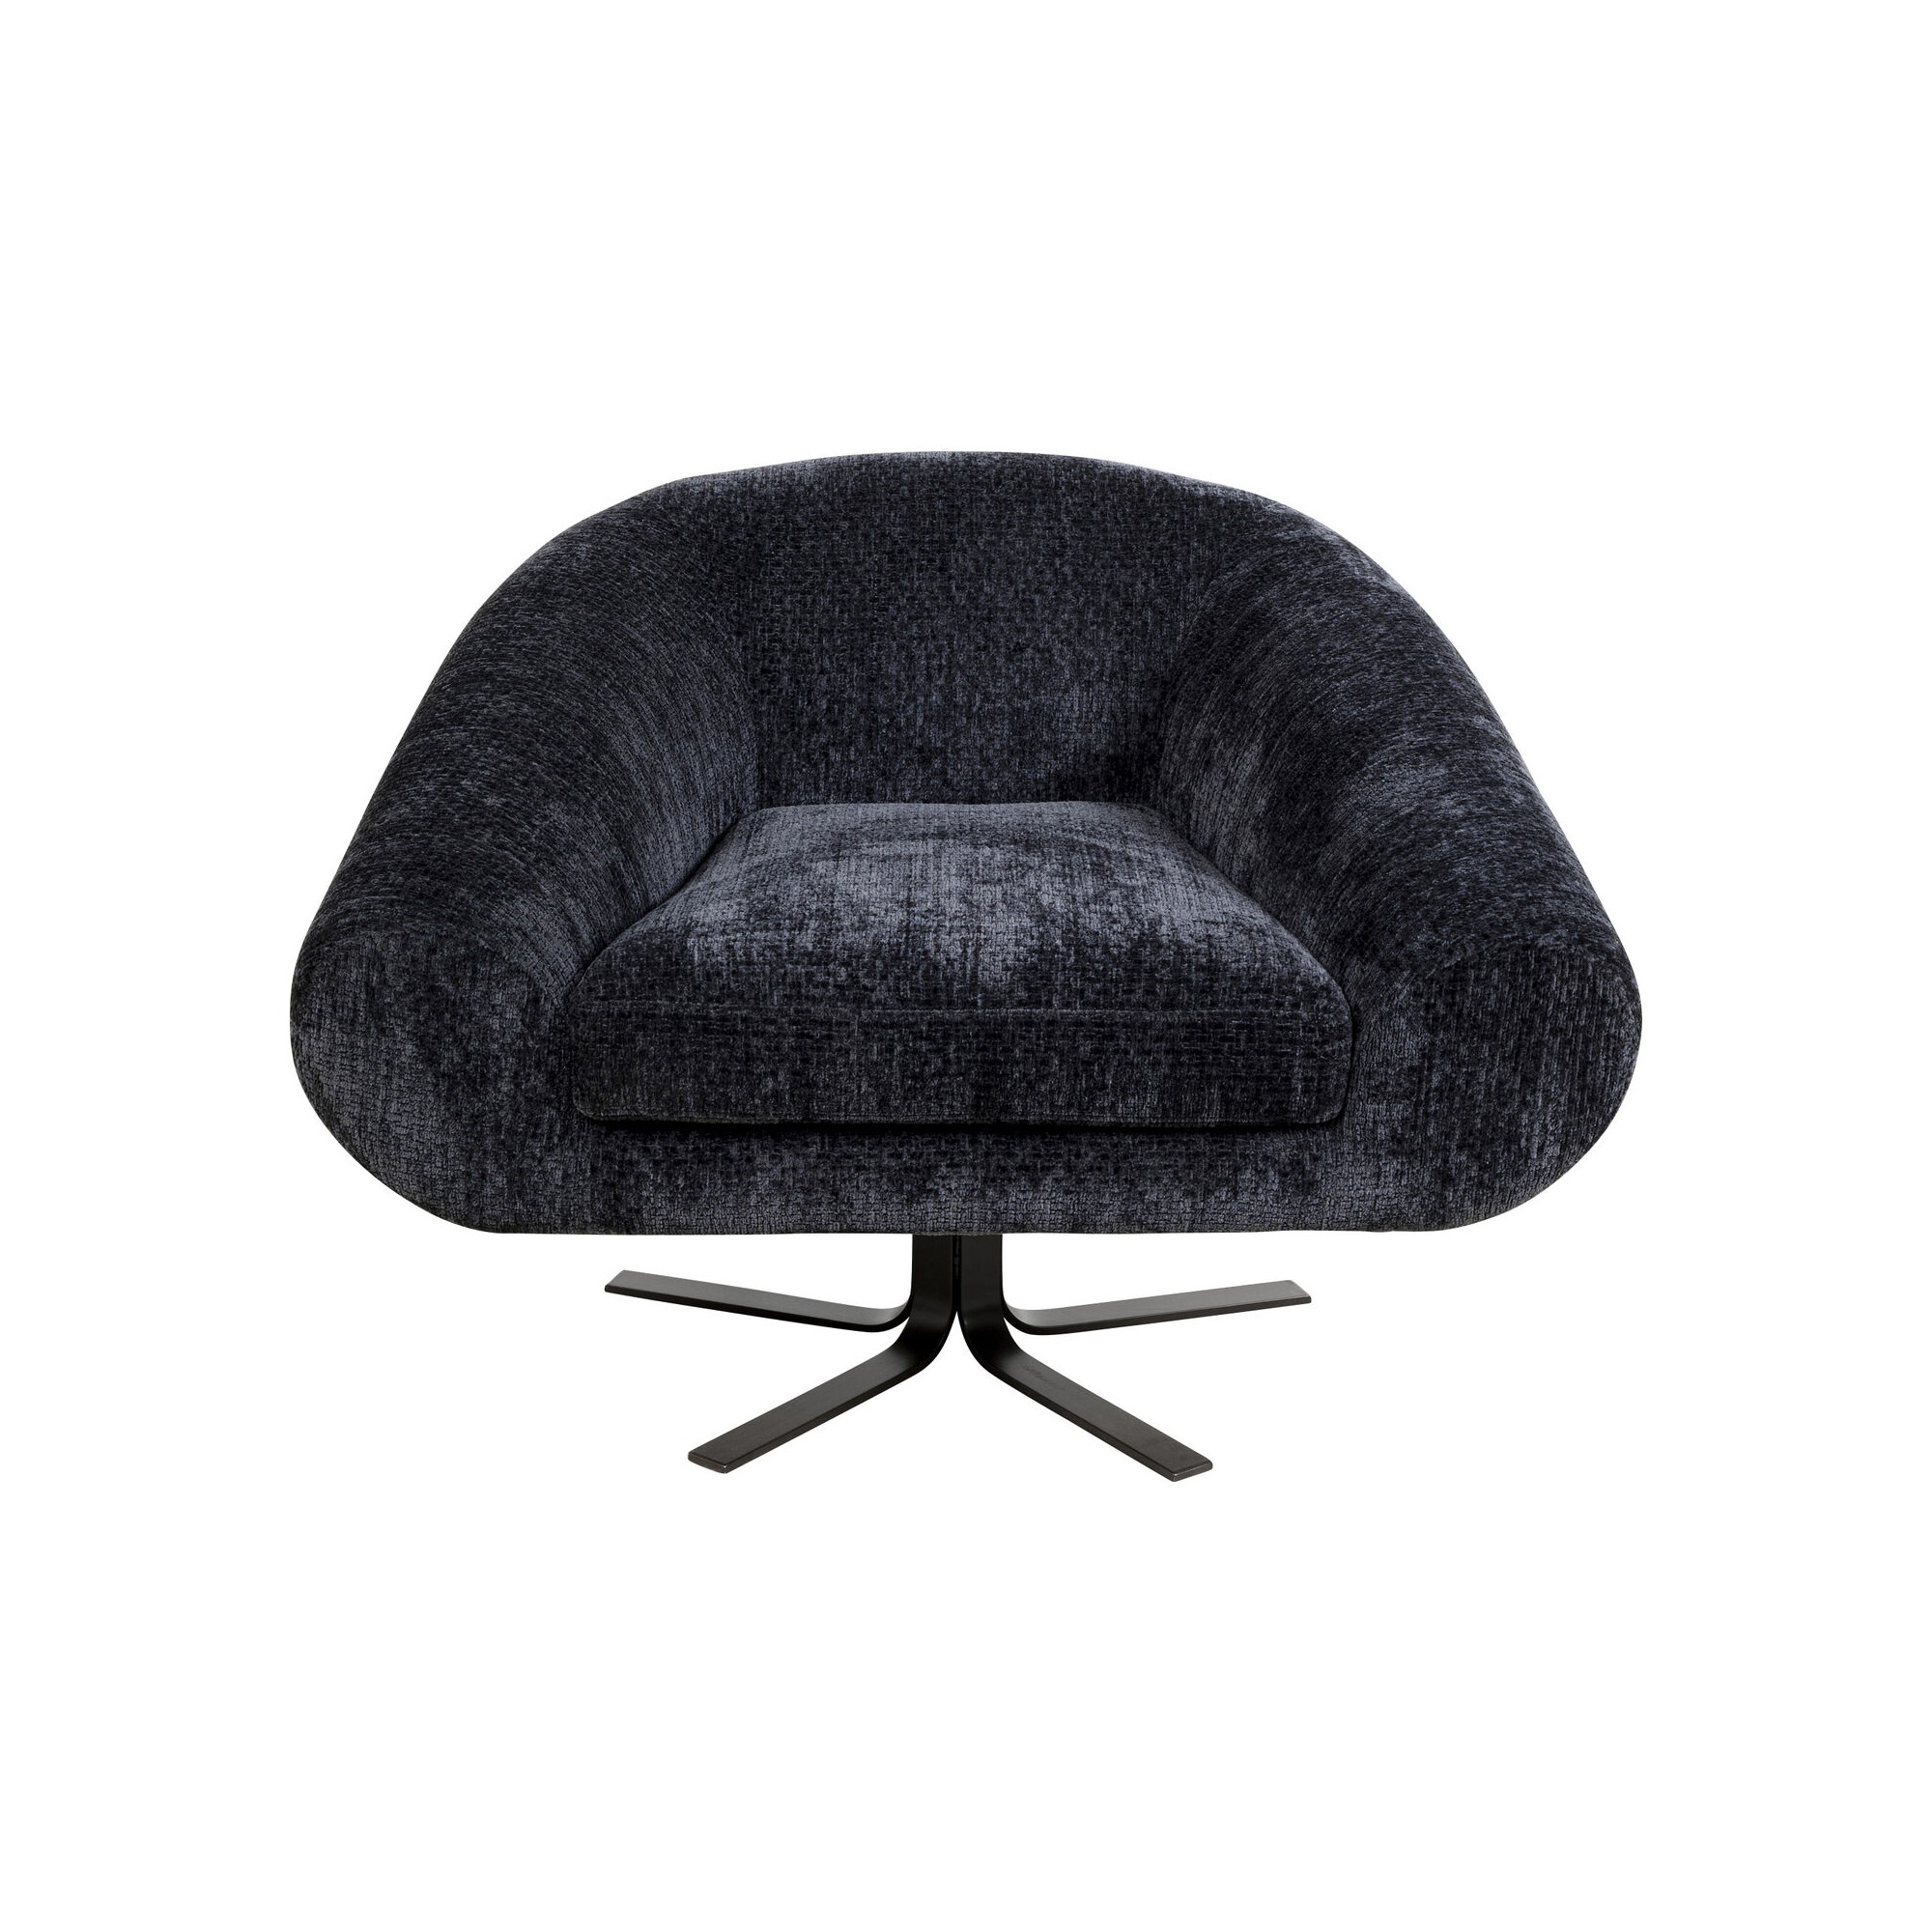 Fauteuil pivotant Ciao Midnight